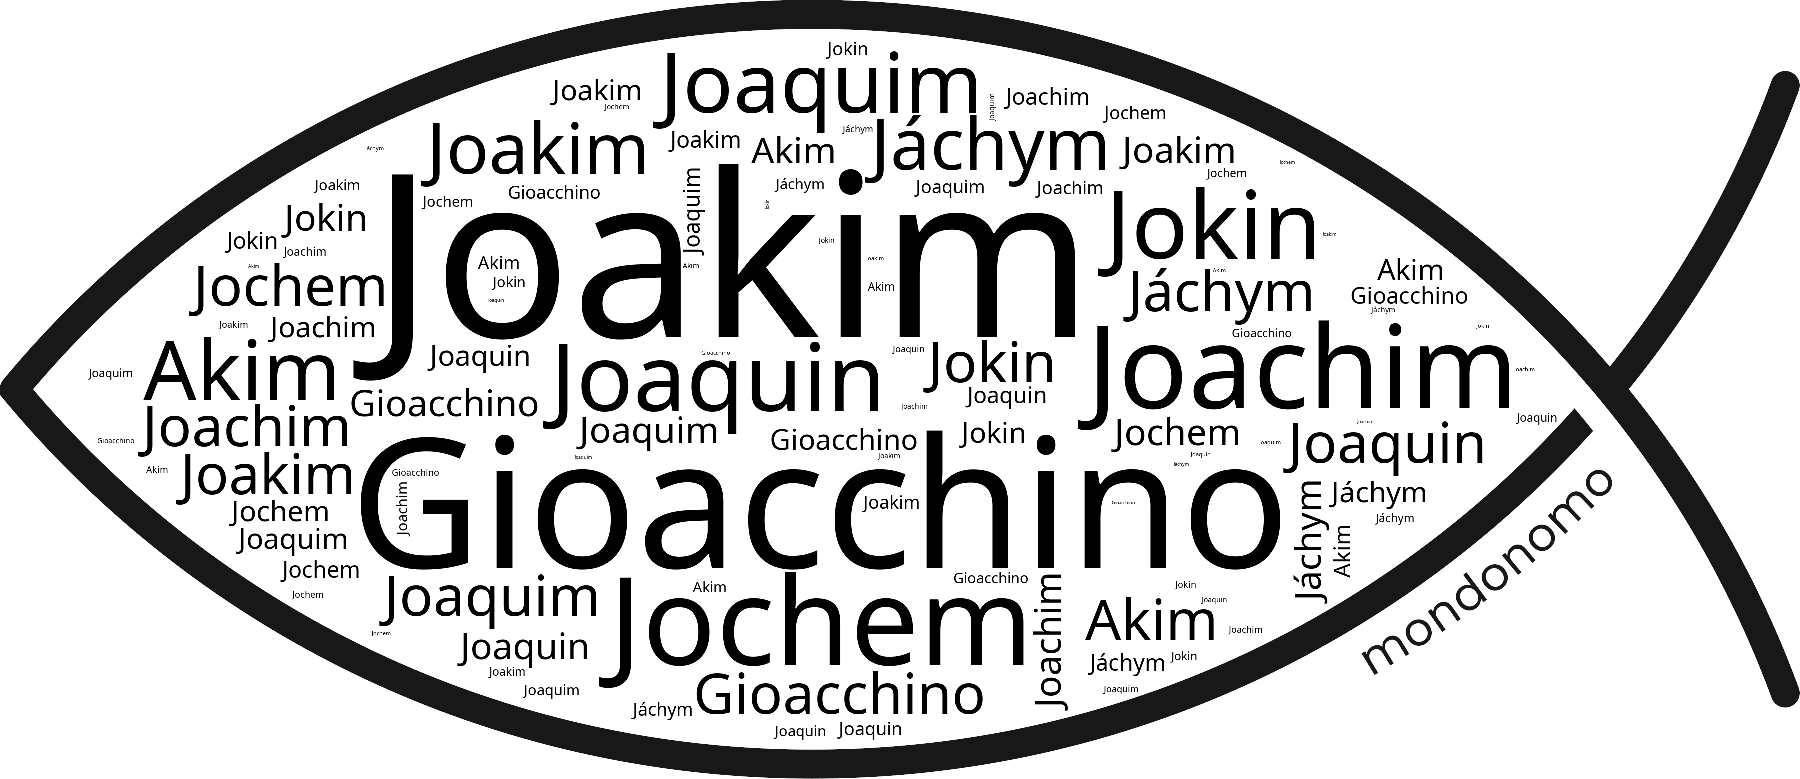 Name Joakim in the world's Bibles